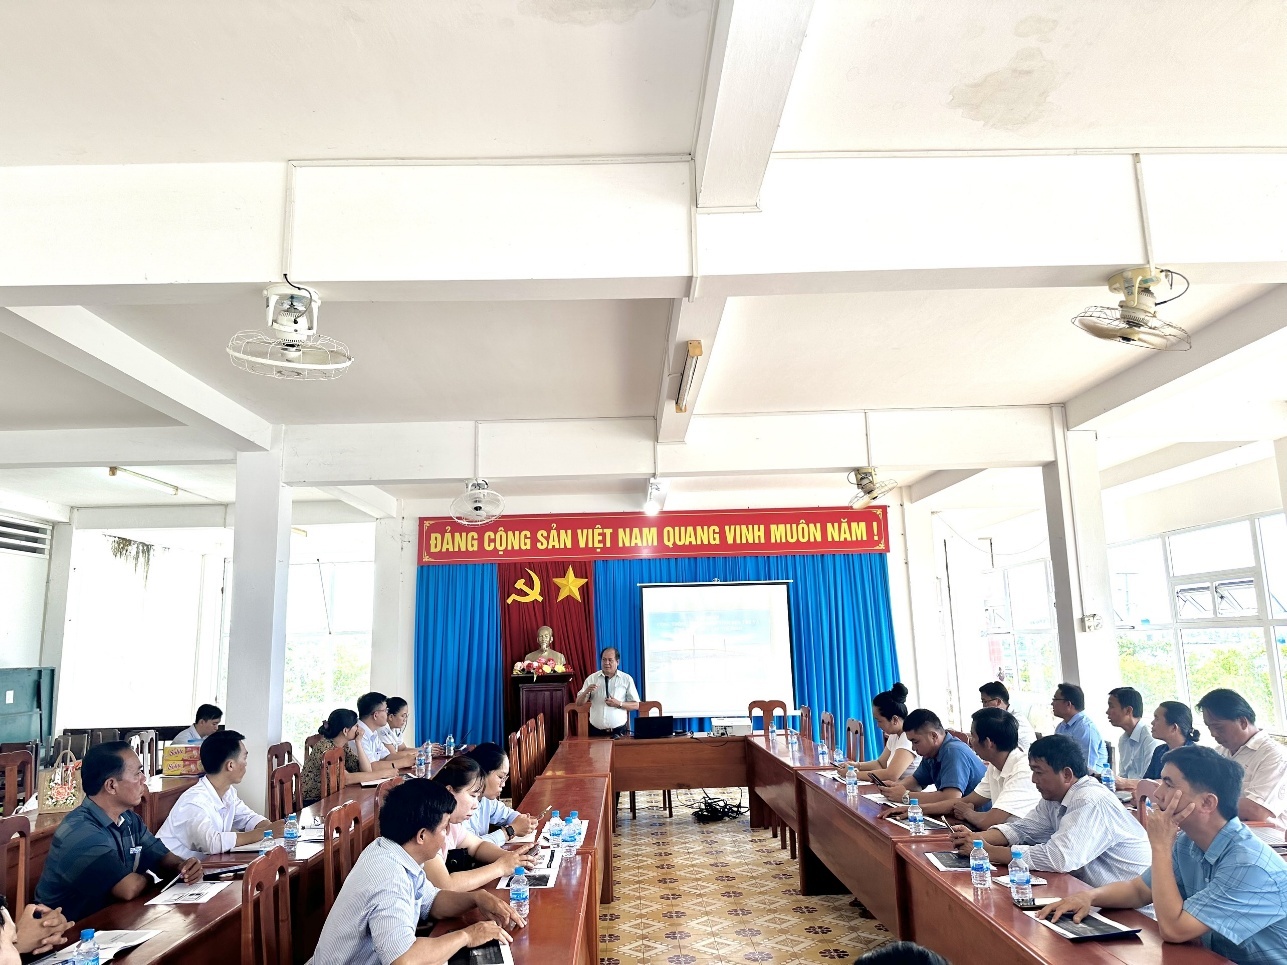 IMPLEMENTING PHASE 2 OF THE PROVINCIAL SCIENCE AND TECHNOLOGY PROJECT ON "APPLICATION OF TECHNOLOGY 4.0 IN DEVELOPING SMART TOURISM IN BEN TRE PROVINCE"